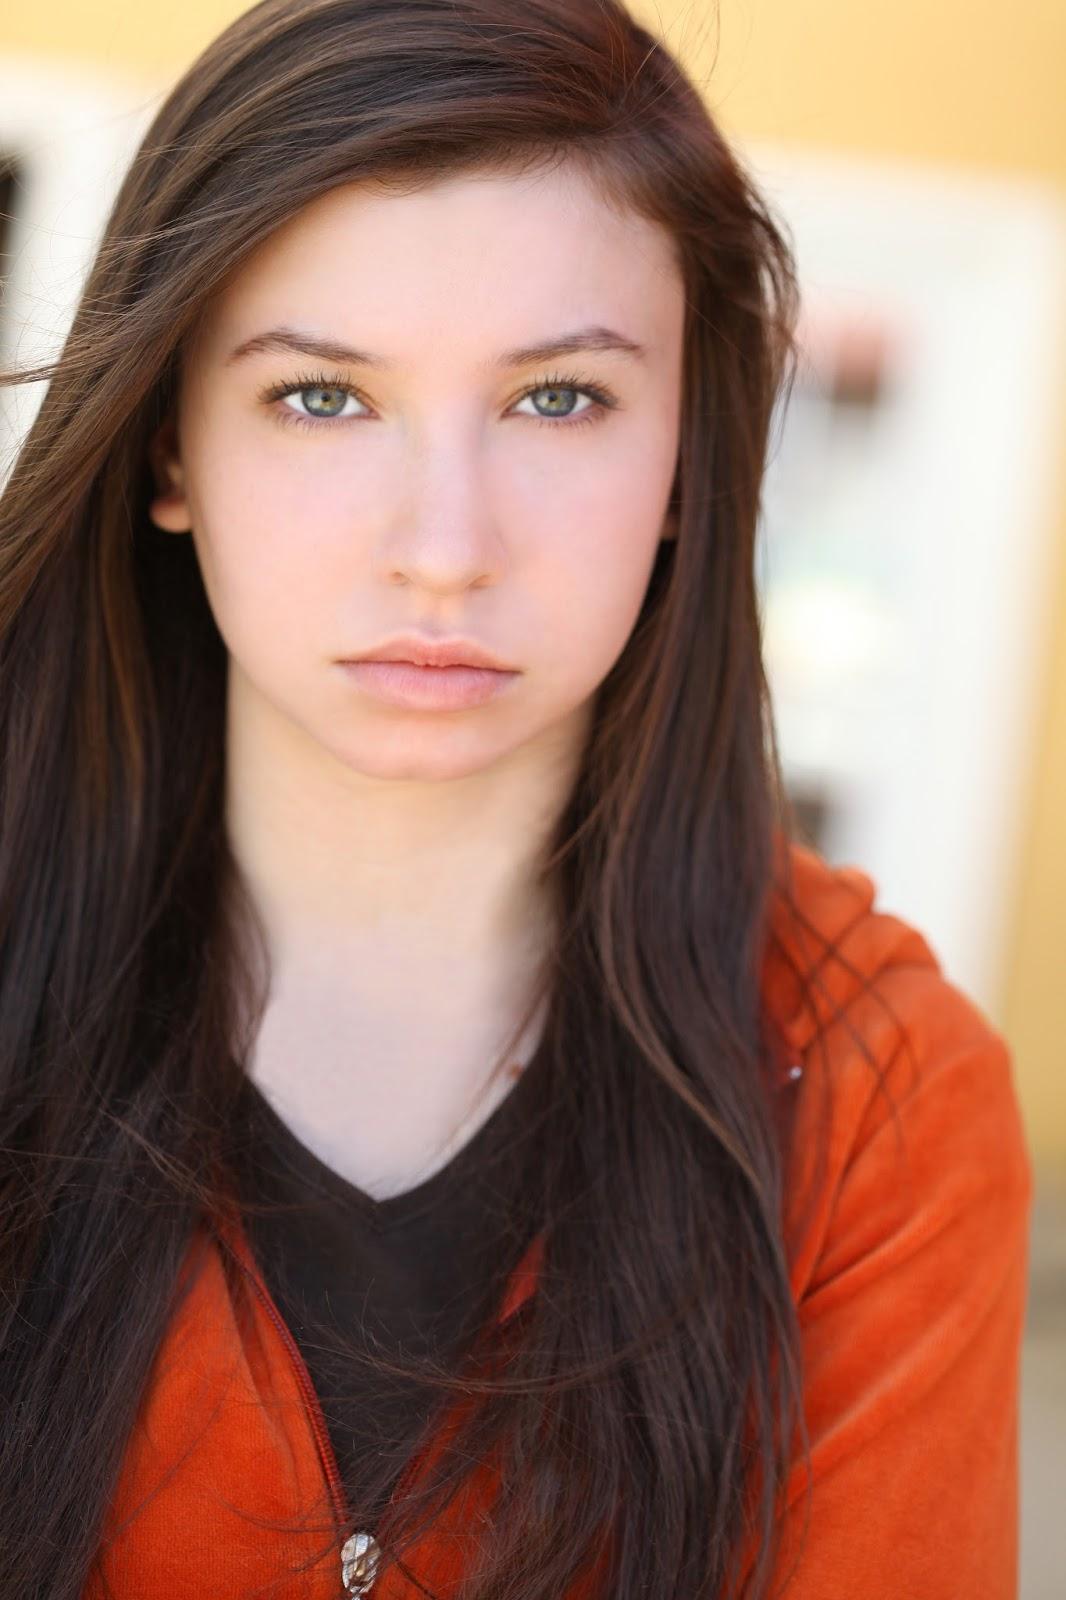 70+ Hot Pictures Of Katelyn Nacon Which Are Sure to Catch Your Attention 35